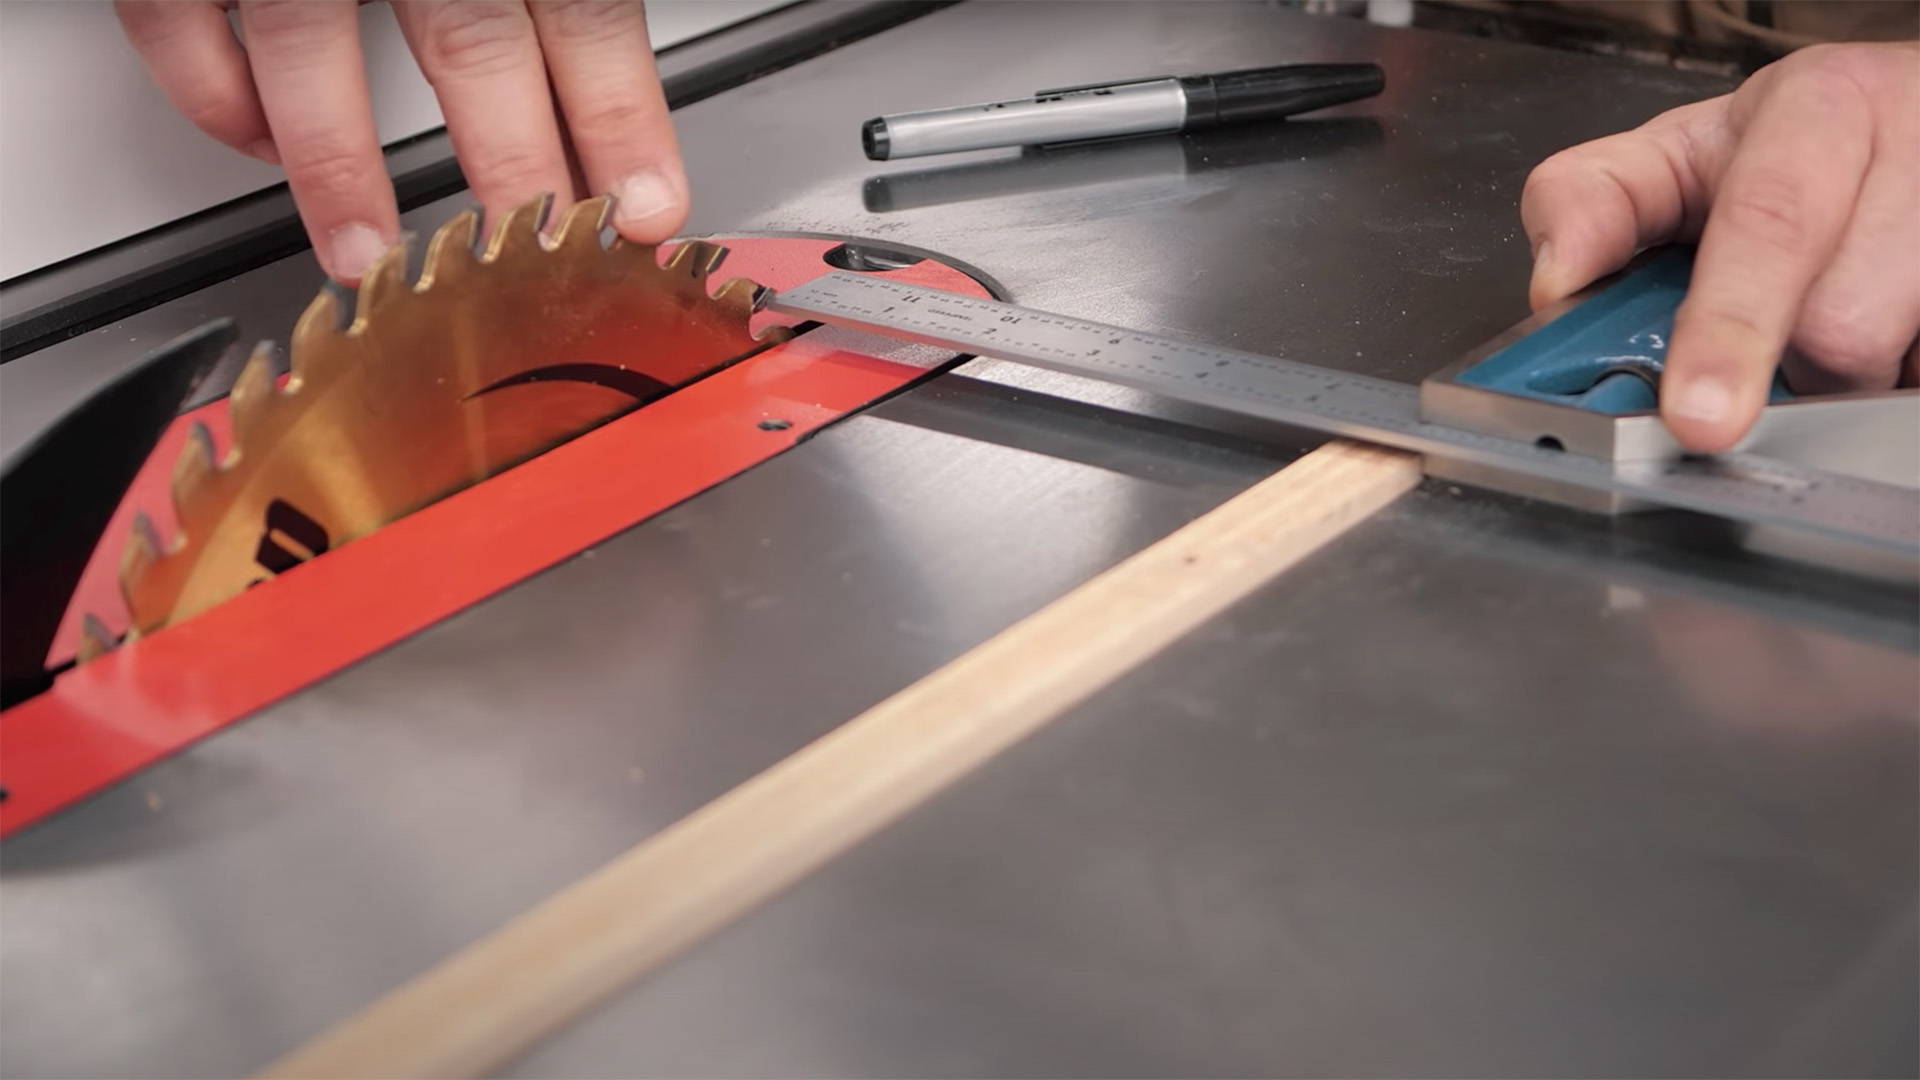 How to Clean and Wax a Tablesaw